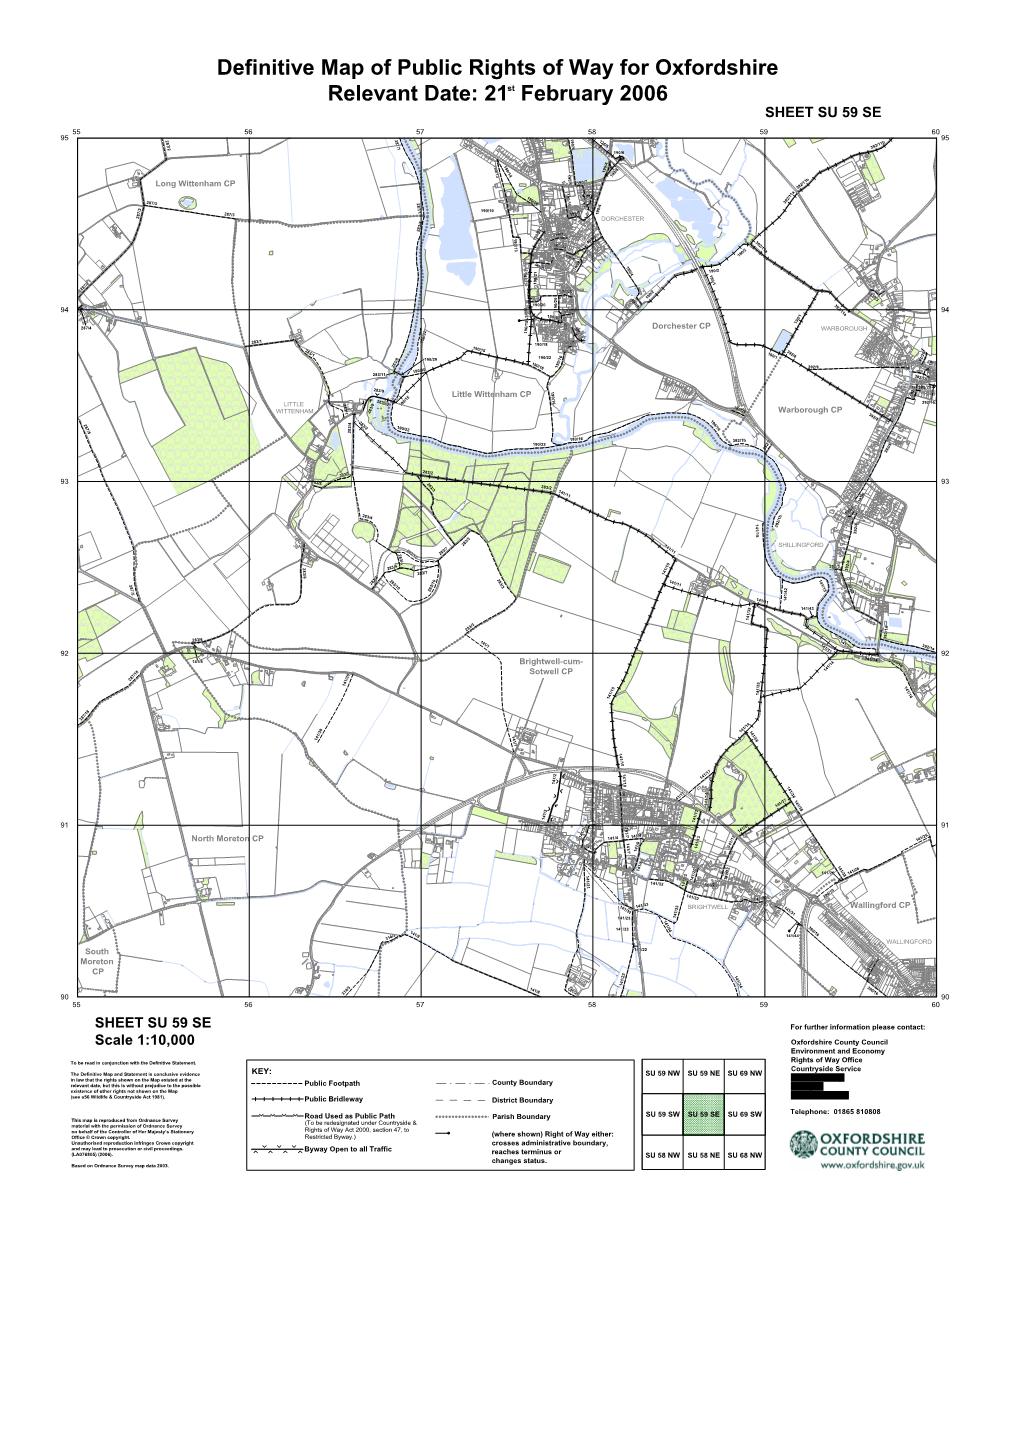 Definitive Map of Public Rights of Way for Oxfordshire Relevant Date: 21St February 2006 Colour SHEET SU 59 SE